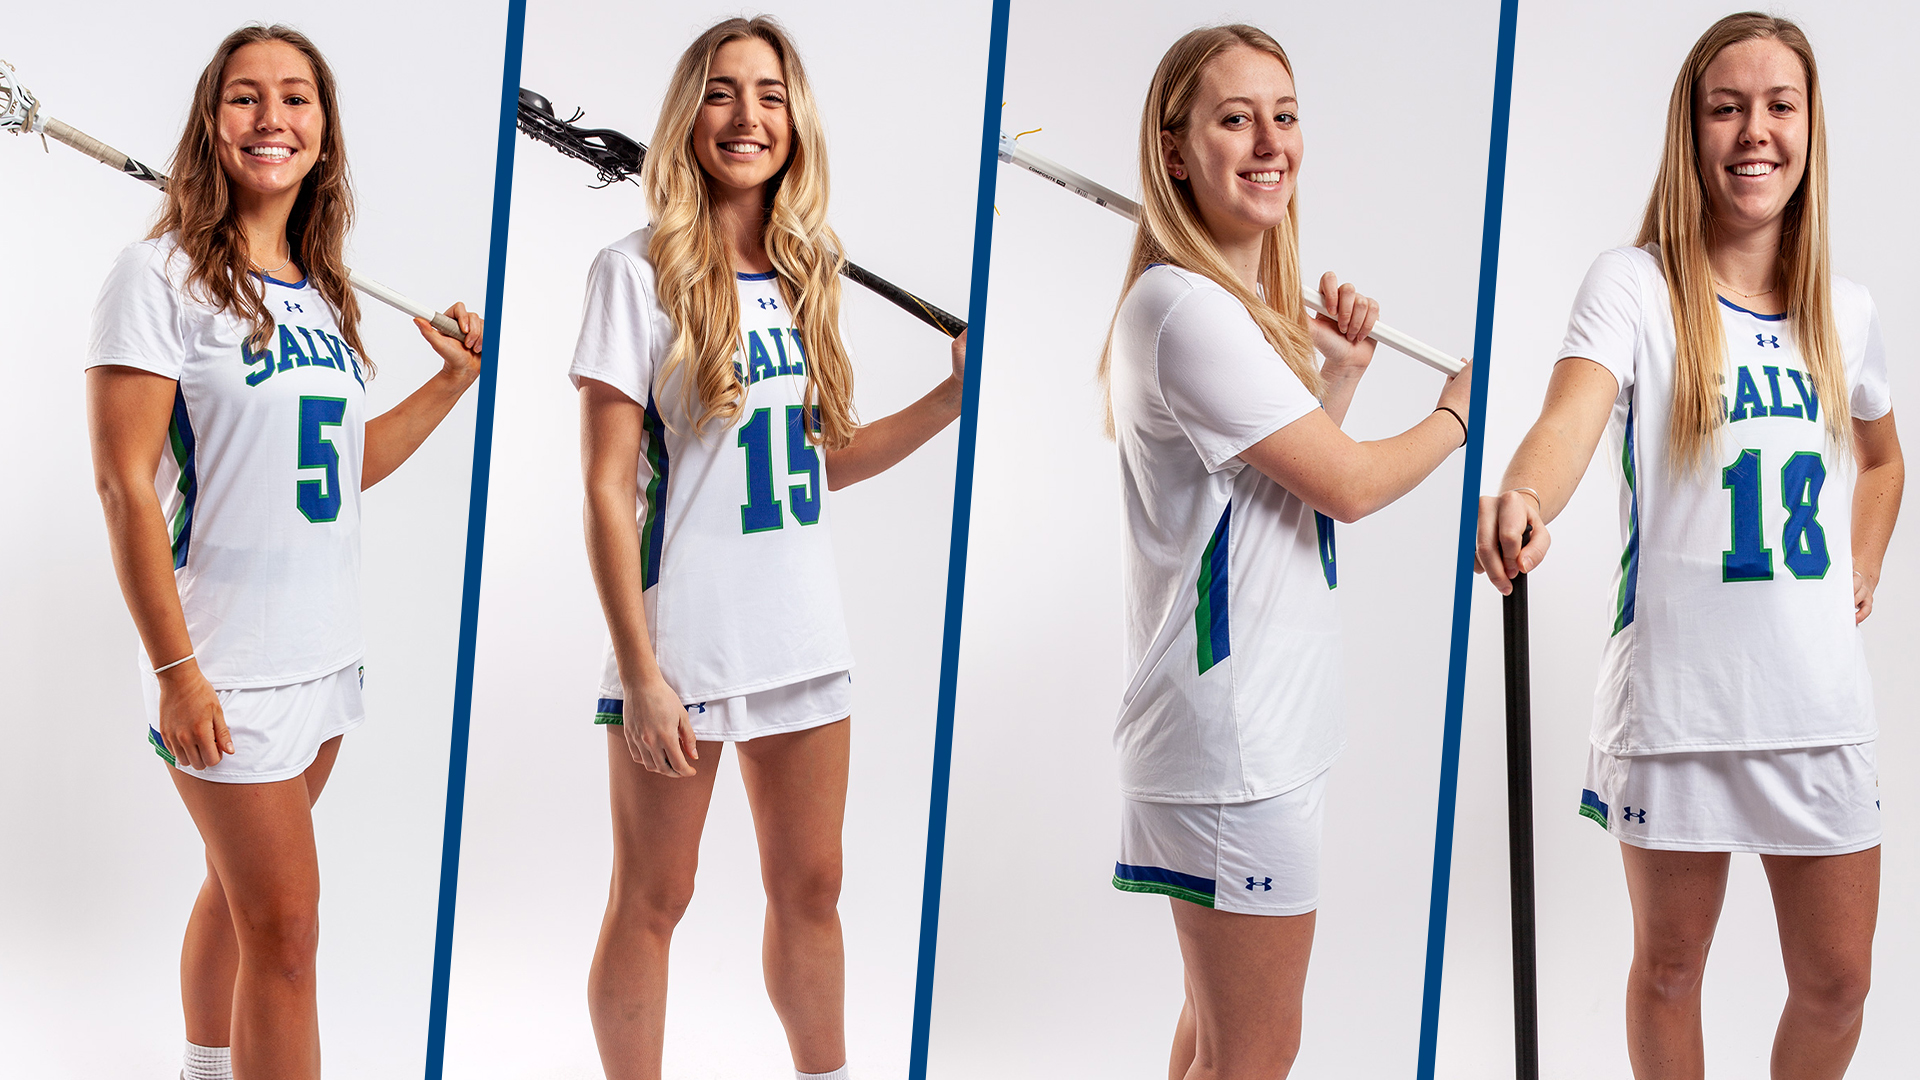 Four captains were named for women's lacrosse in 2023.